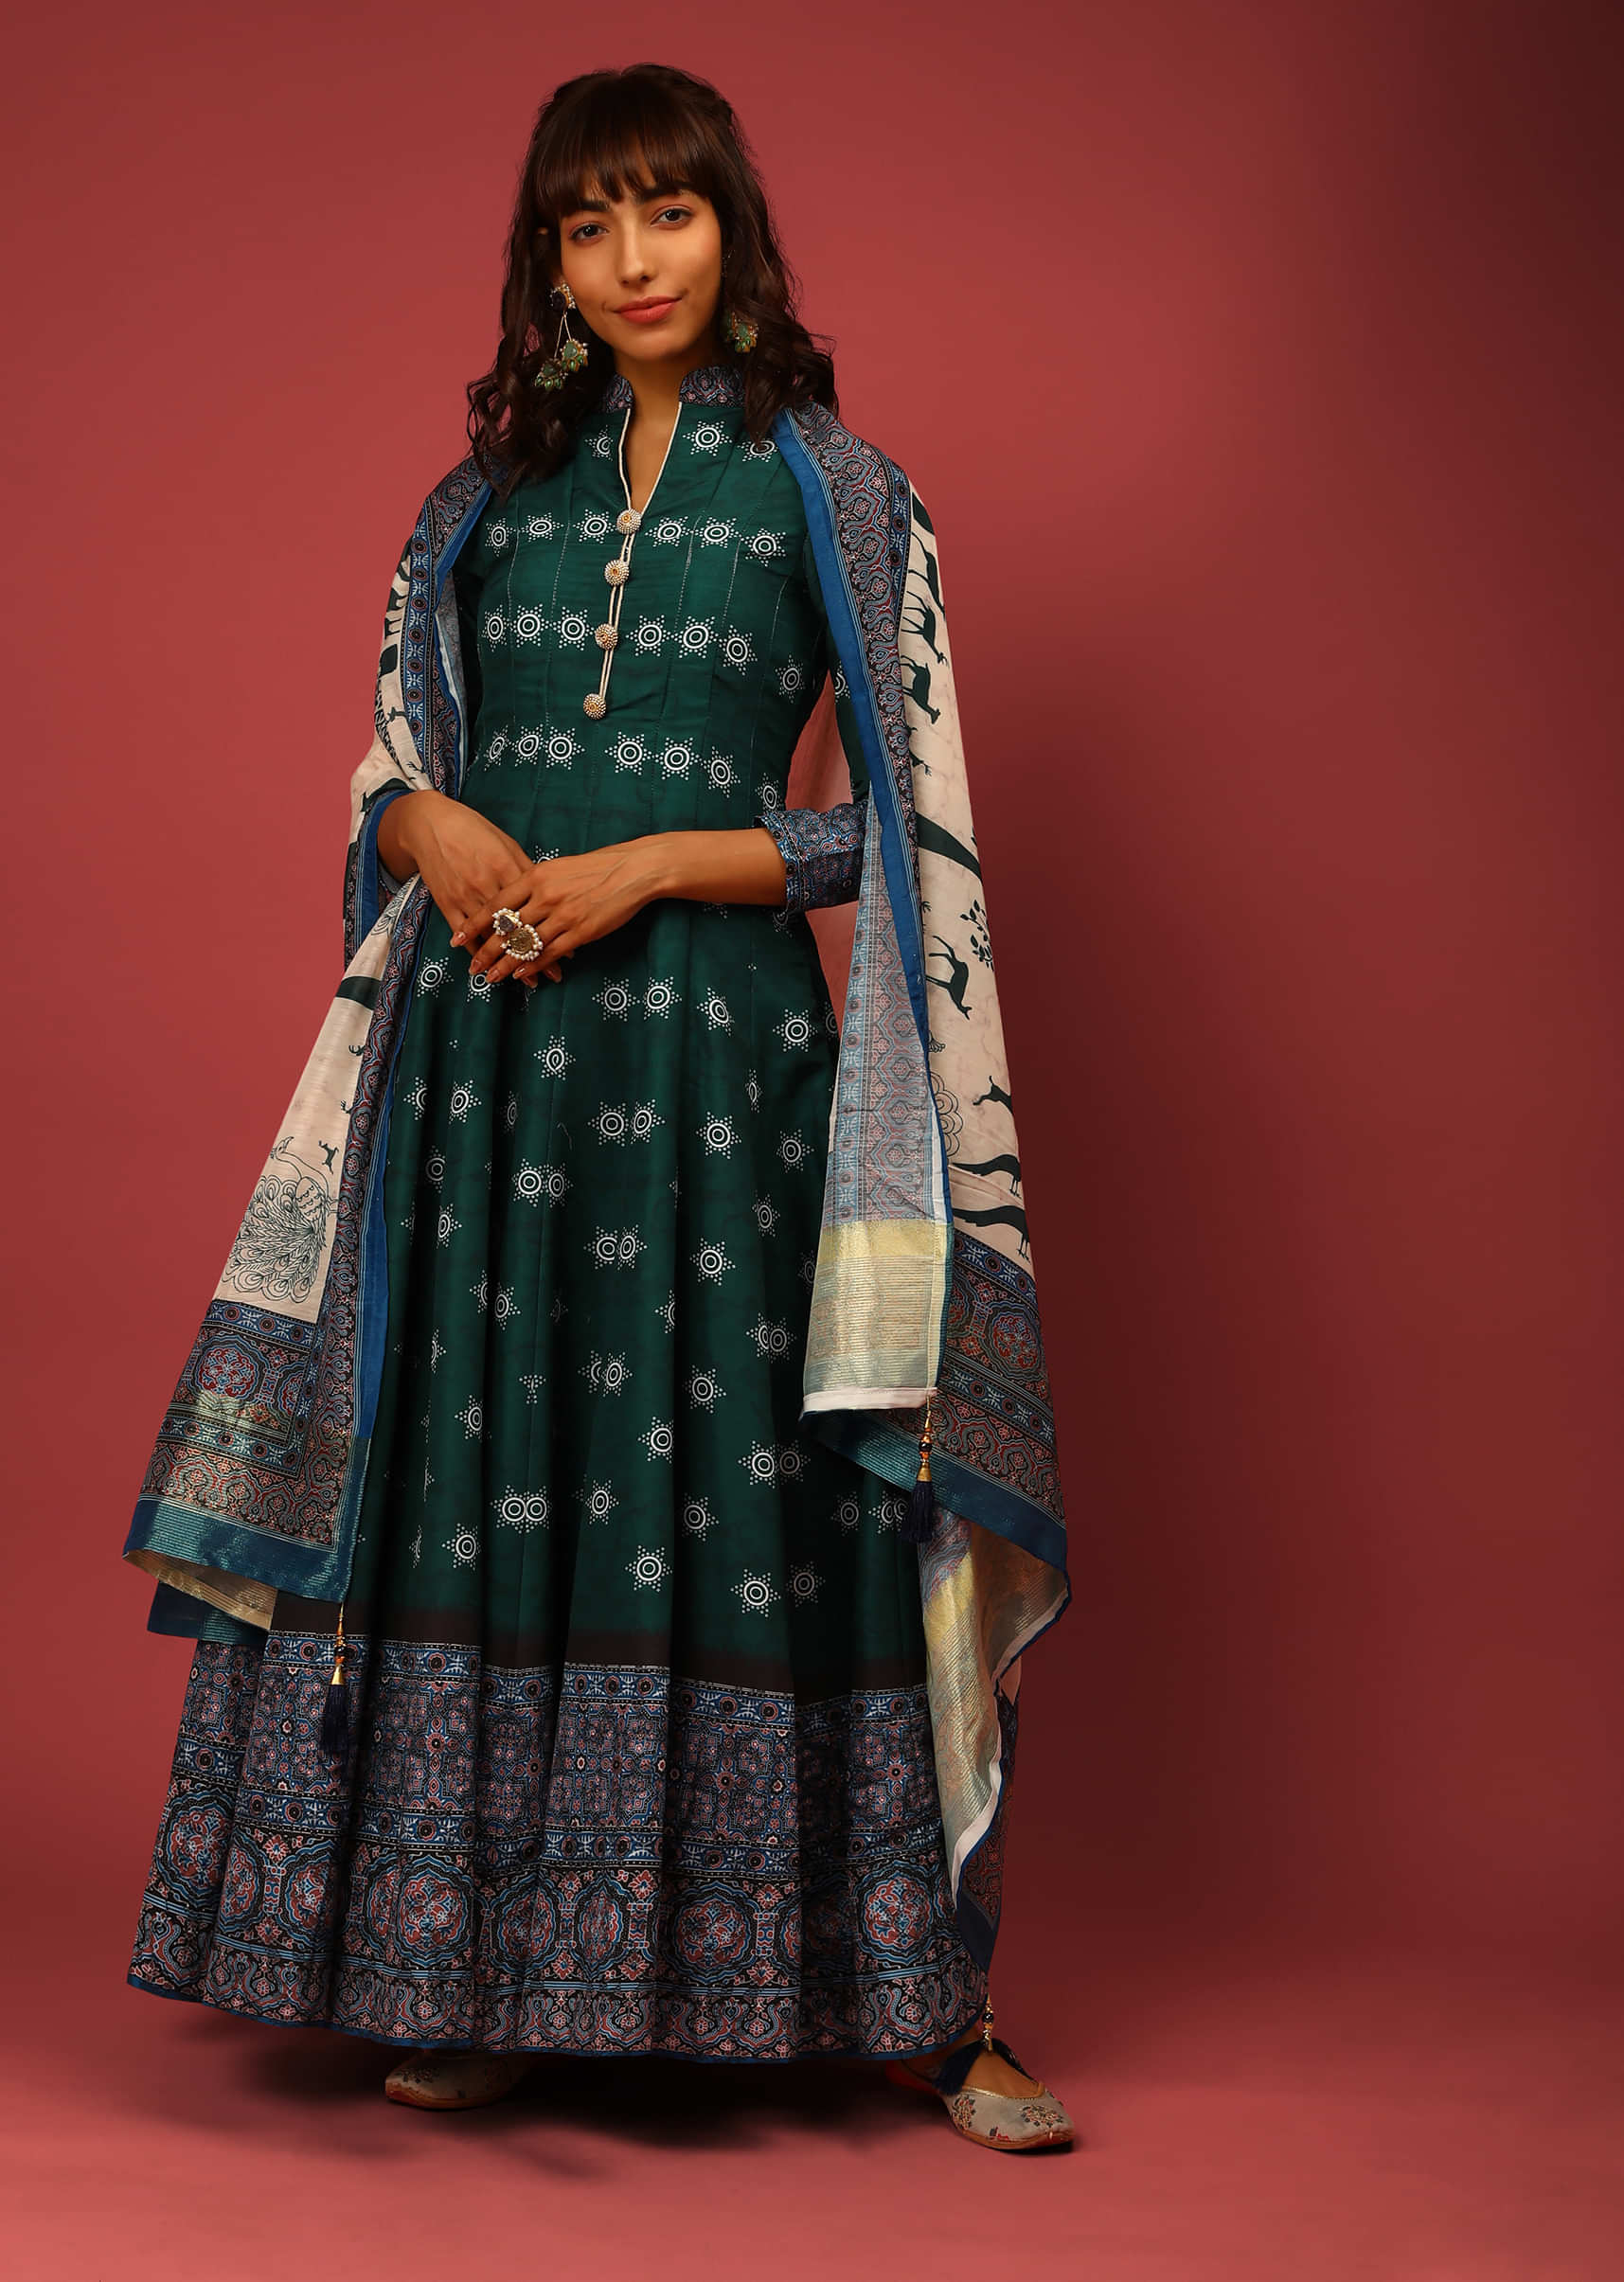 Bottle Green Anarkali Suit In Silk With Bandhani Buttis And Contrasting Black And Blue Border With Ethnic Print  